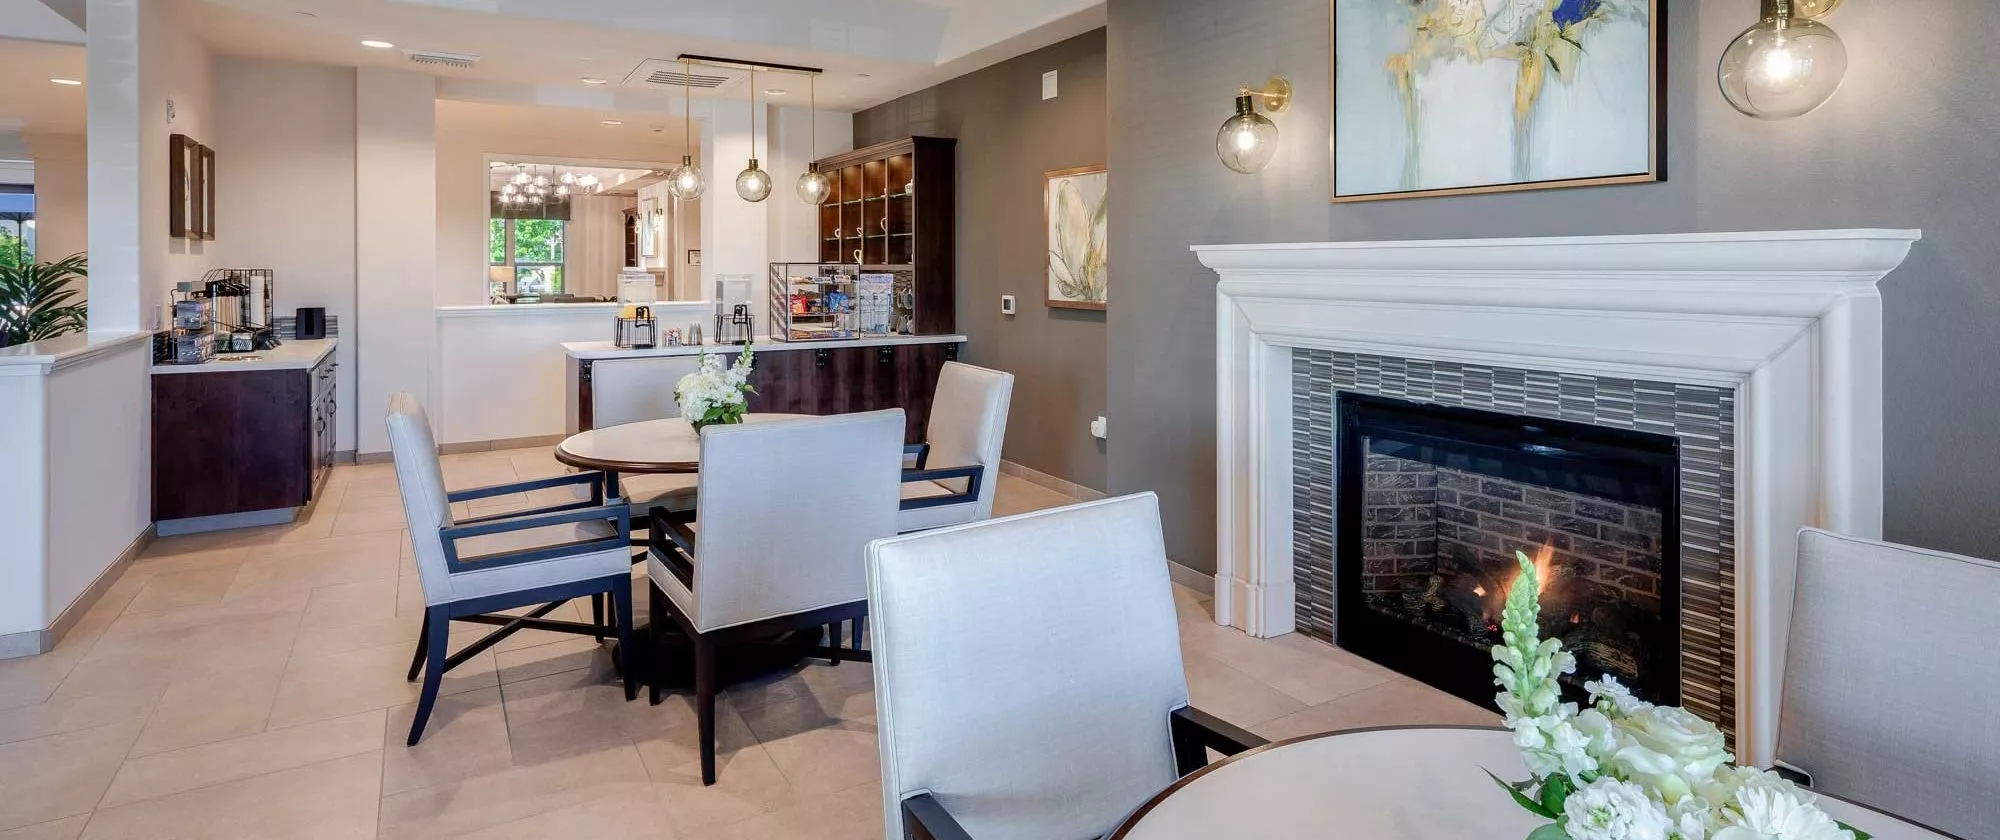 Westpark bistro with chairs, tables and fire place